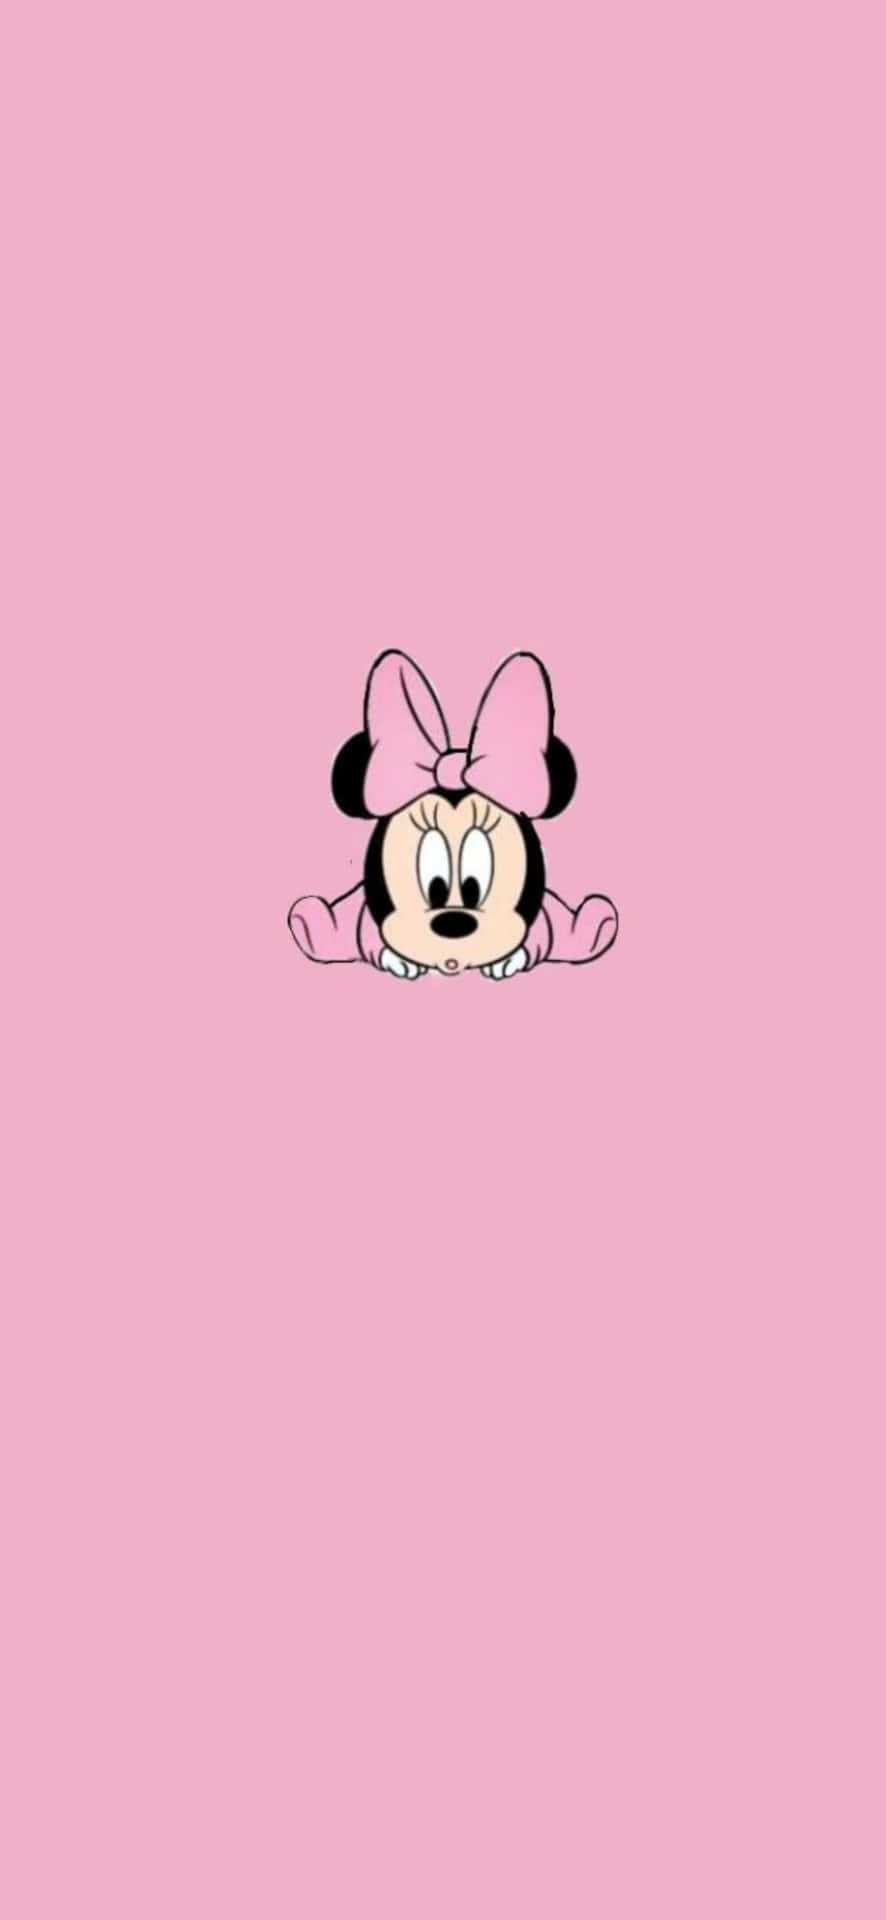 Minnie Mouse On A Pink Background Wallpaper